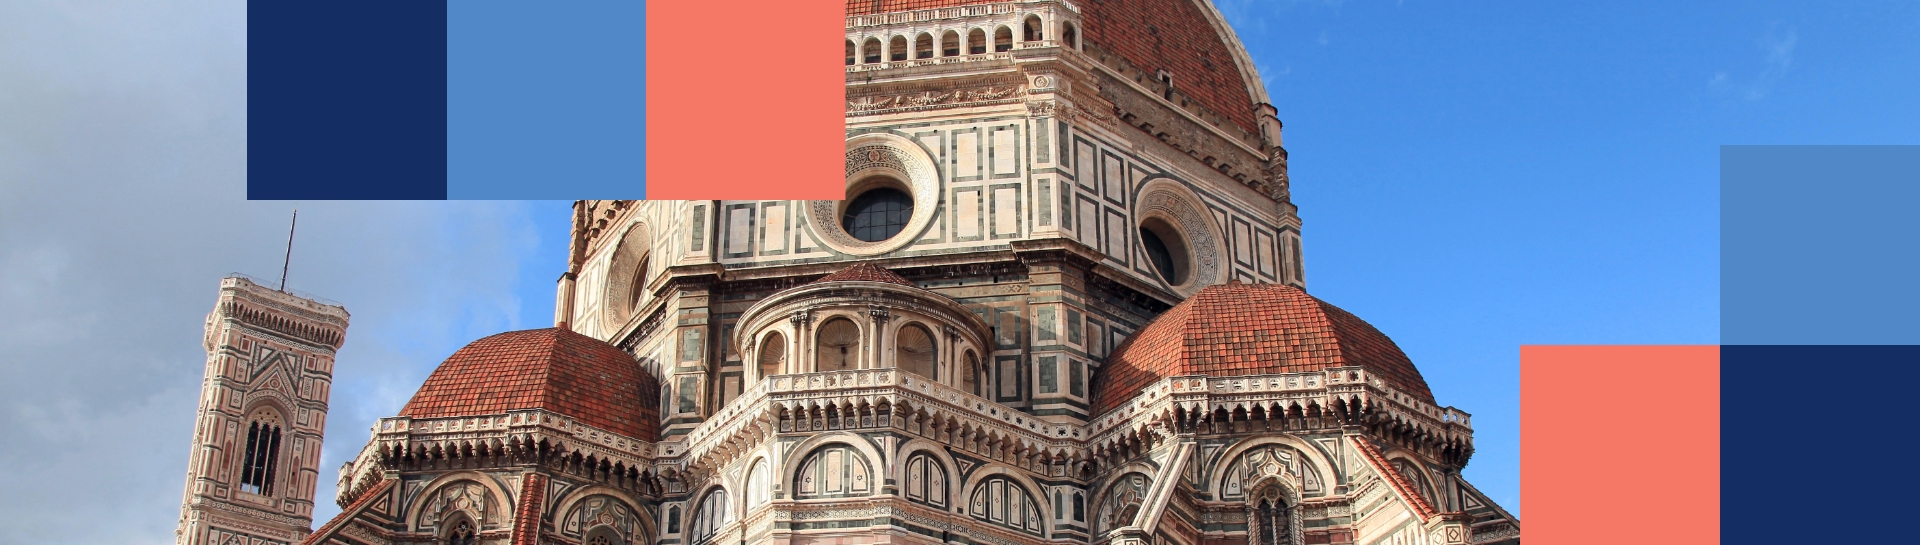 Brunelleschi's Dome Florence Cathedral in Florence